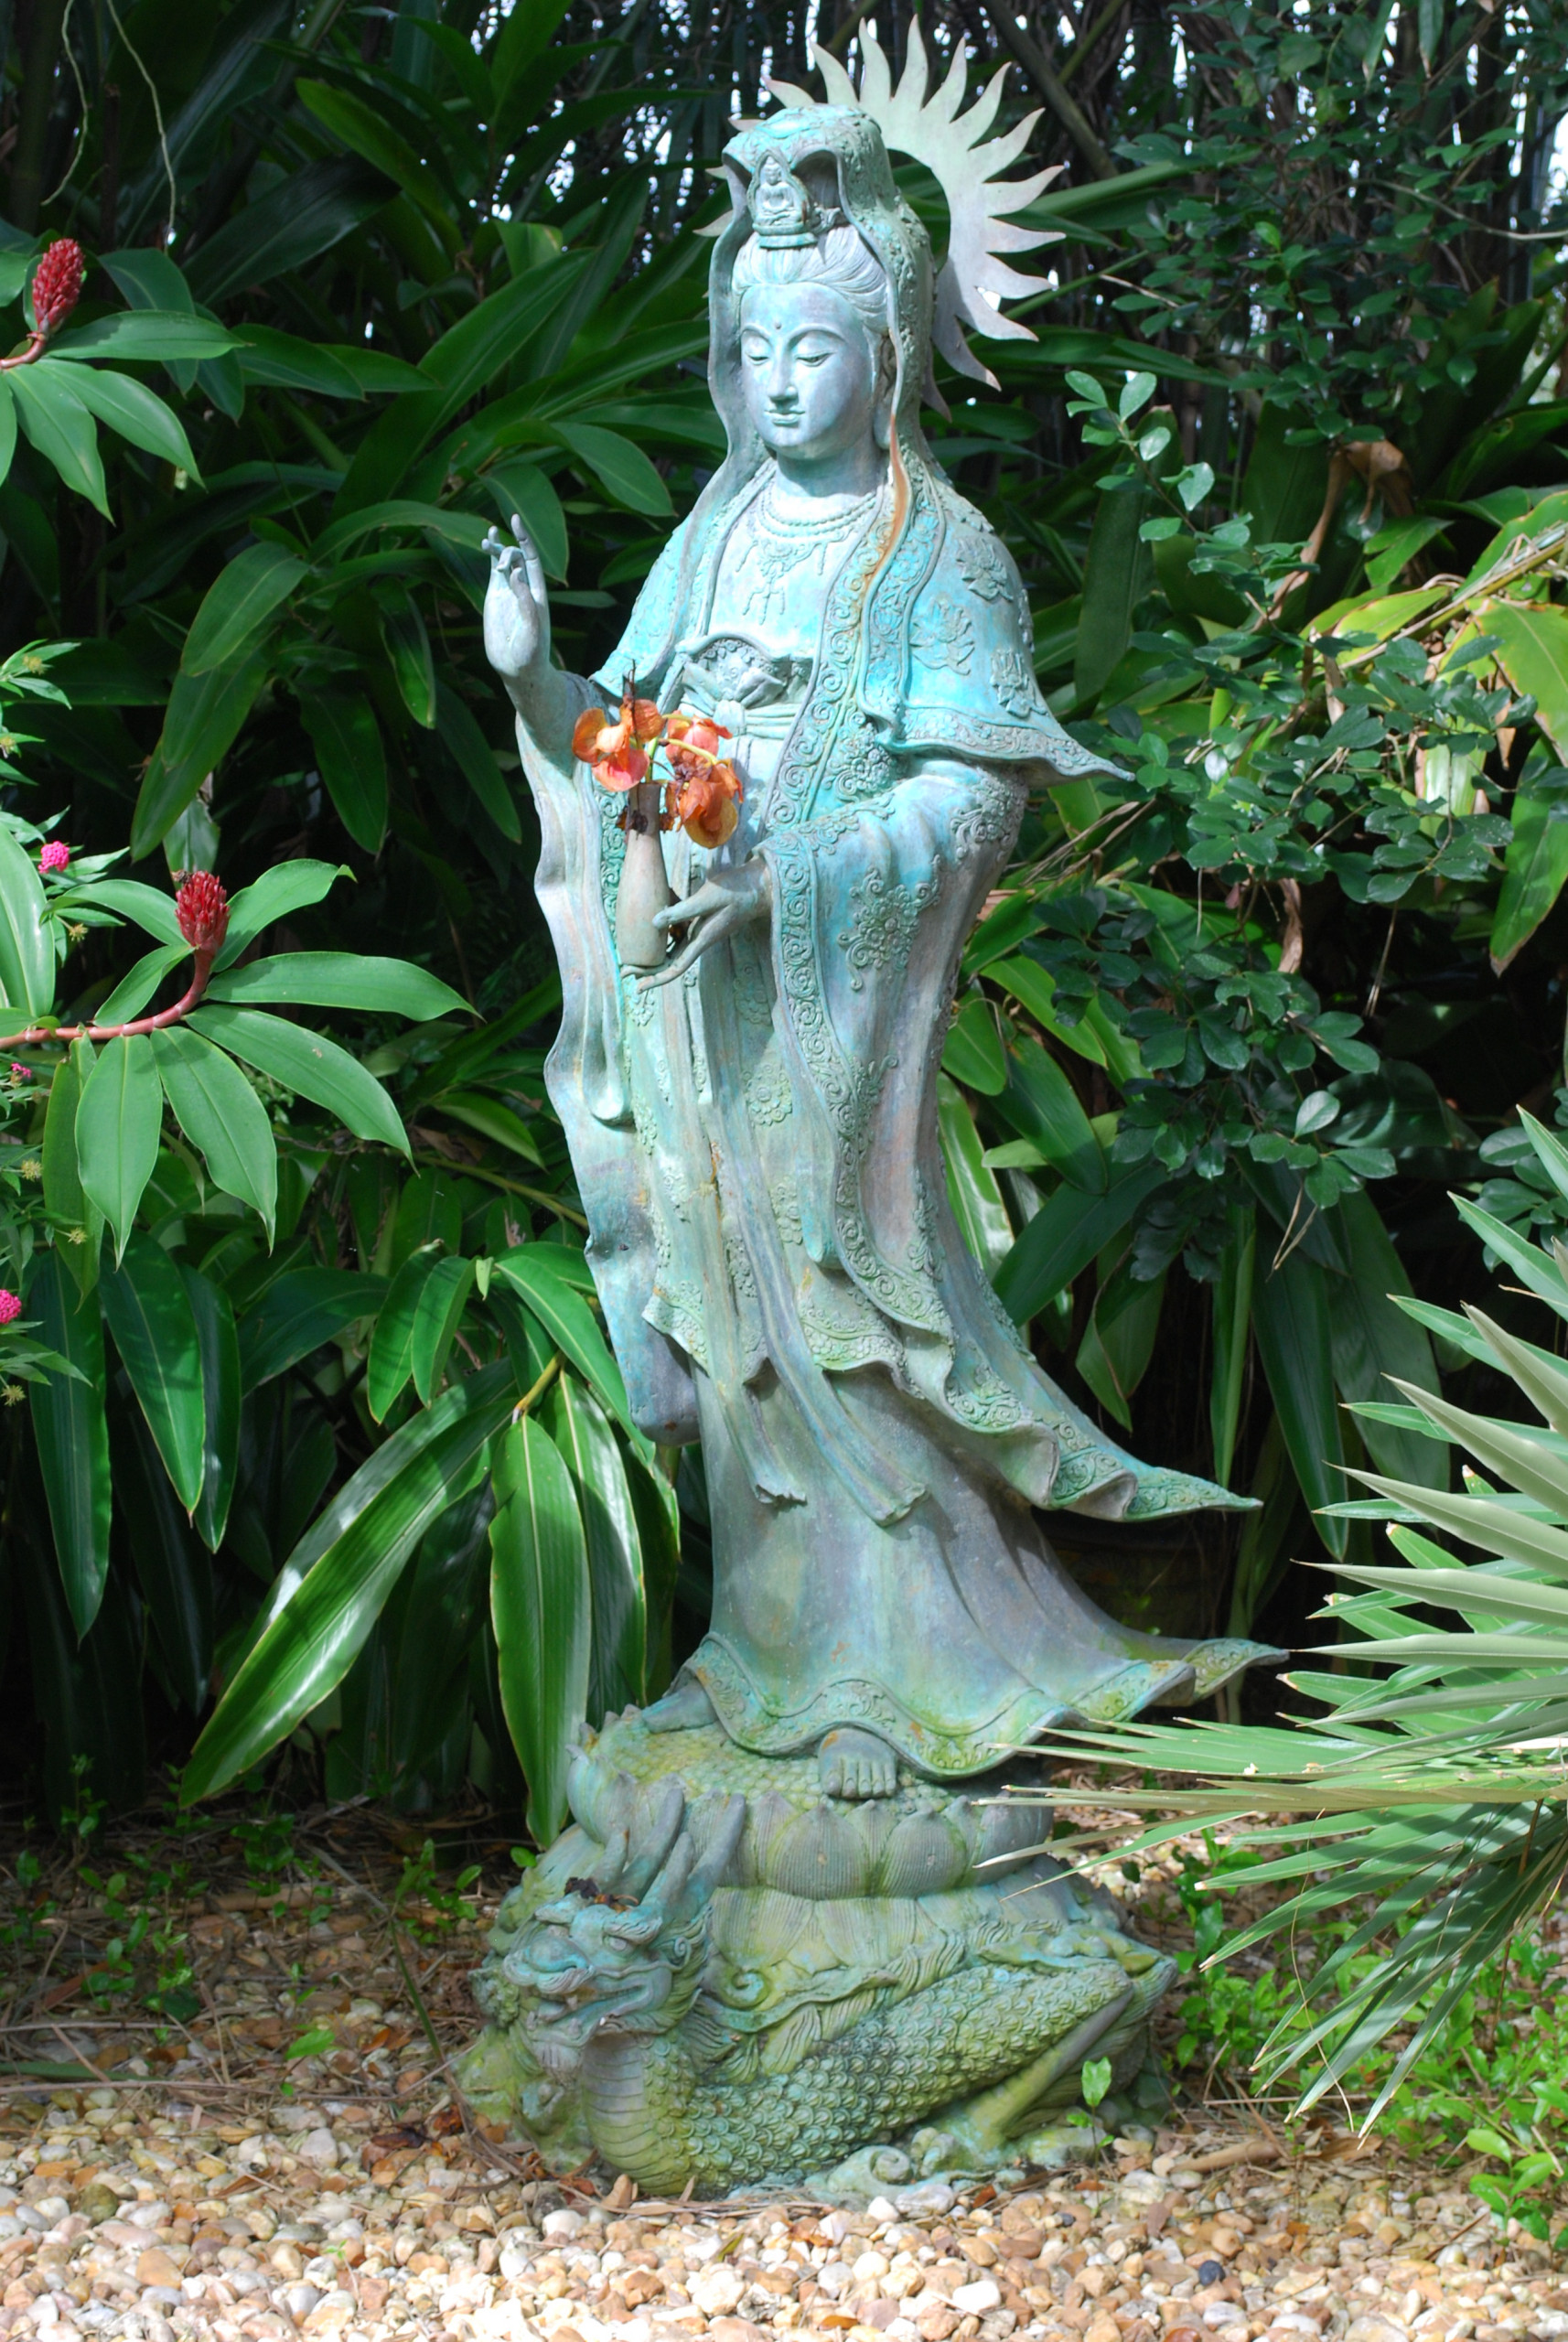 Asian sculpture brings tranquility to garden.